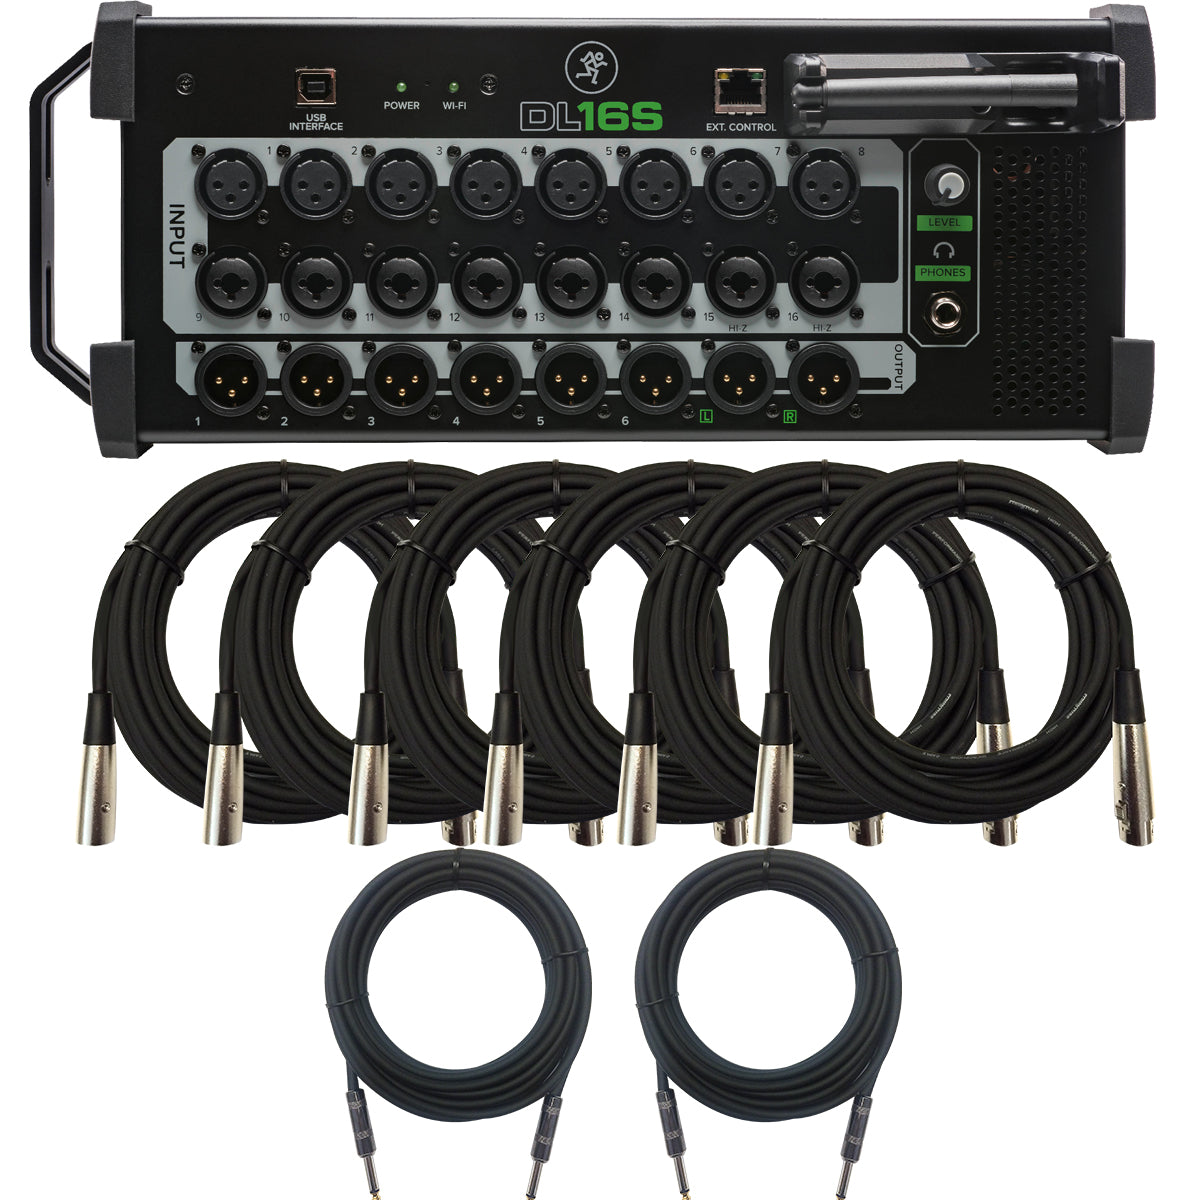 Collage image of the Mackie DL16S Wireless Digital Mixer CABLE KIT